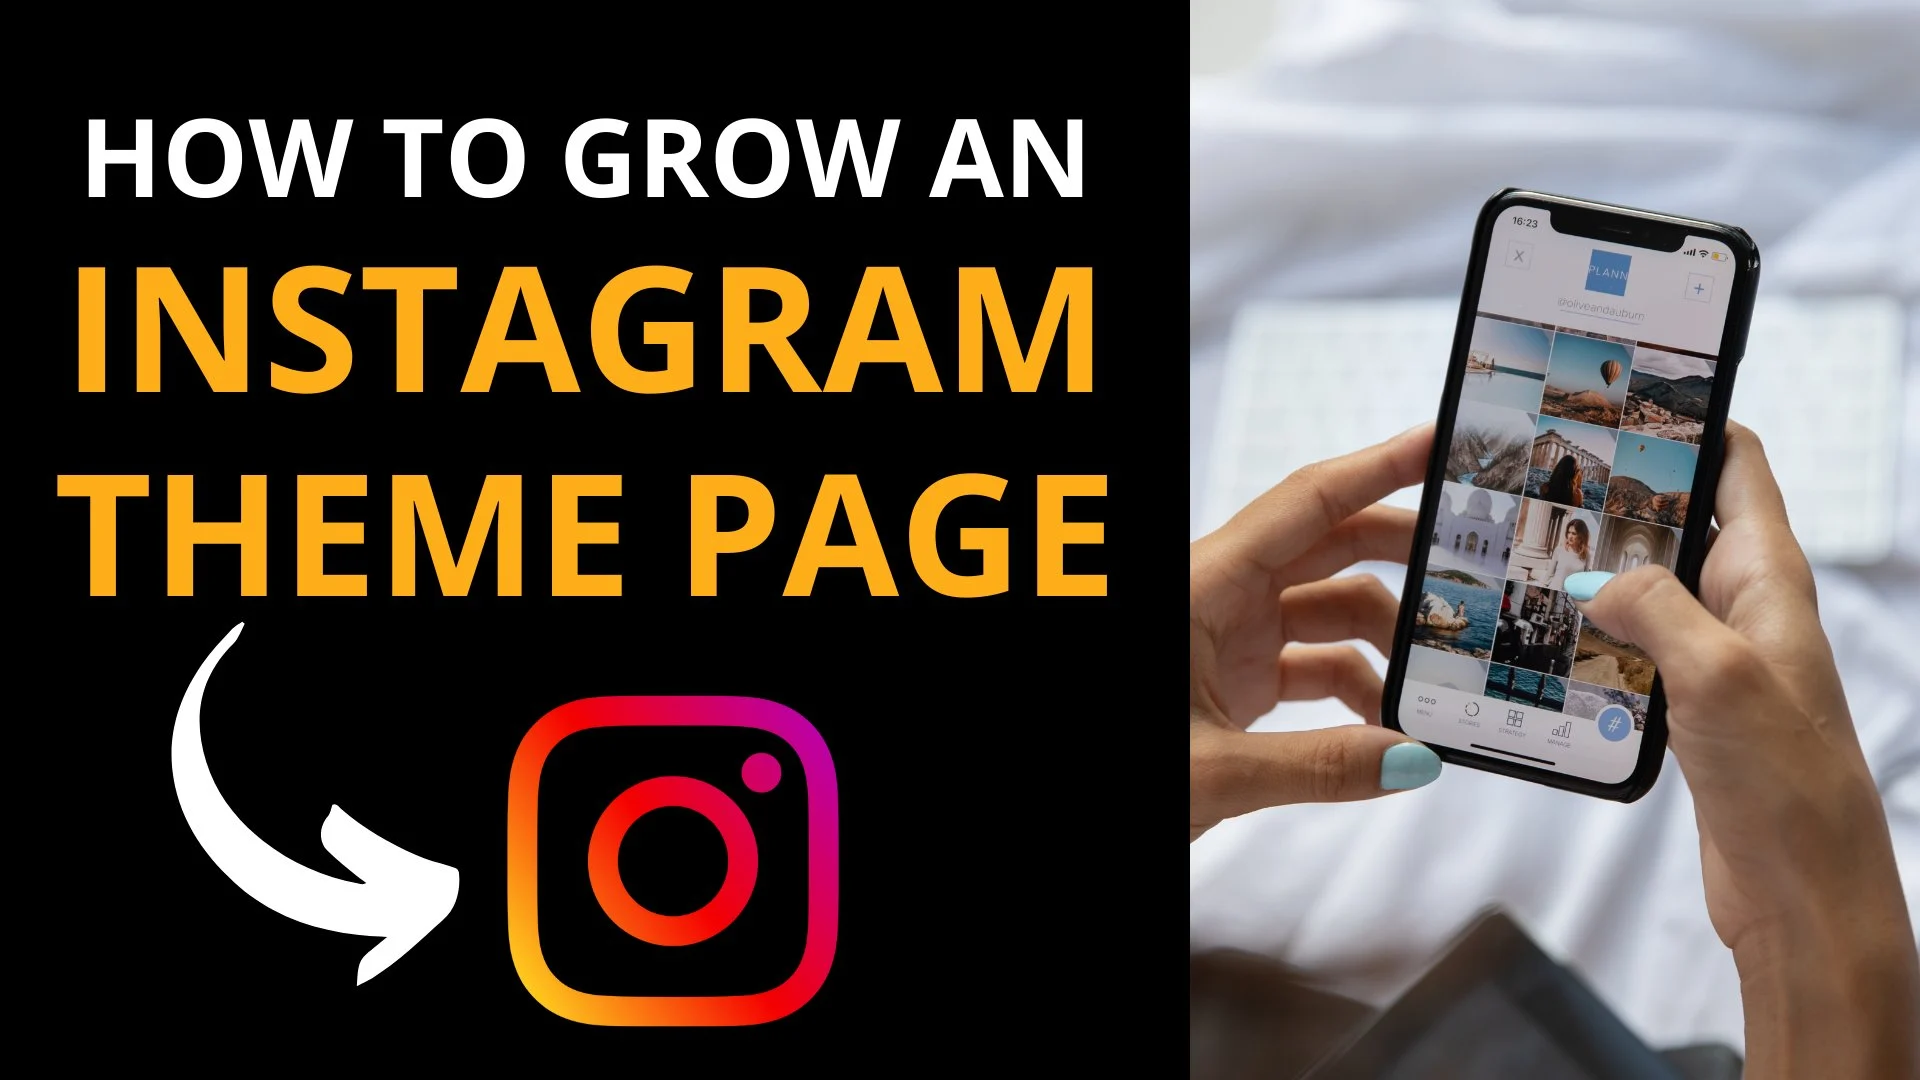 Instagram Marketing: How To Grow An Instagram Theme Page For Business